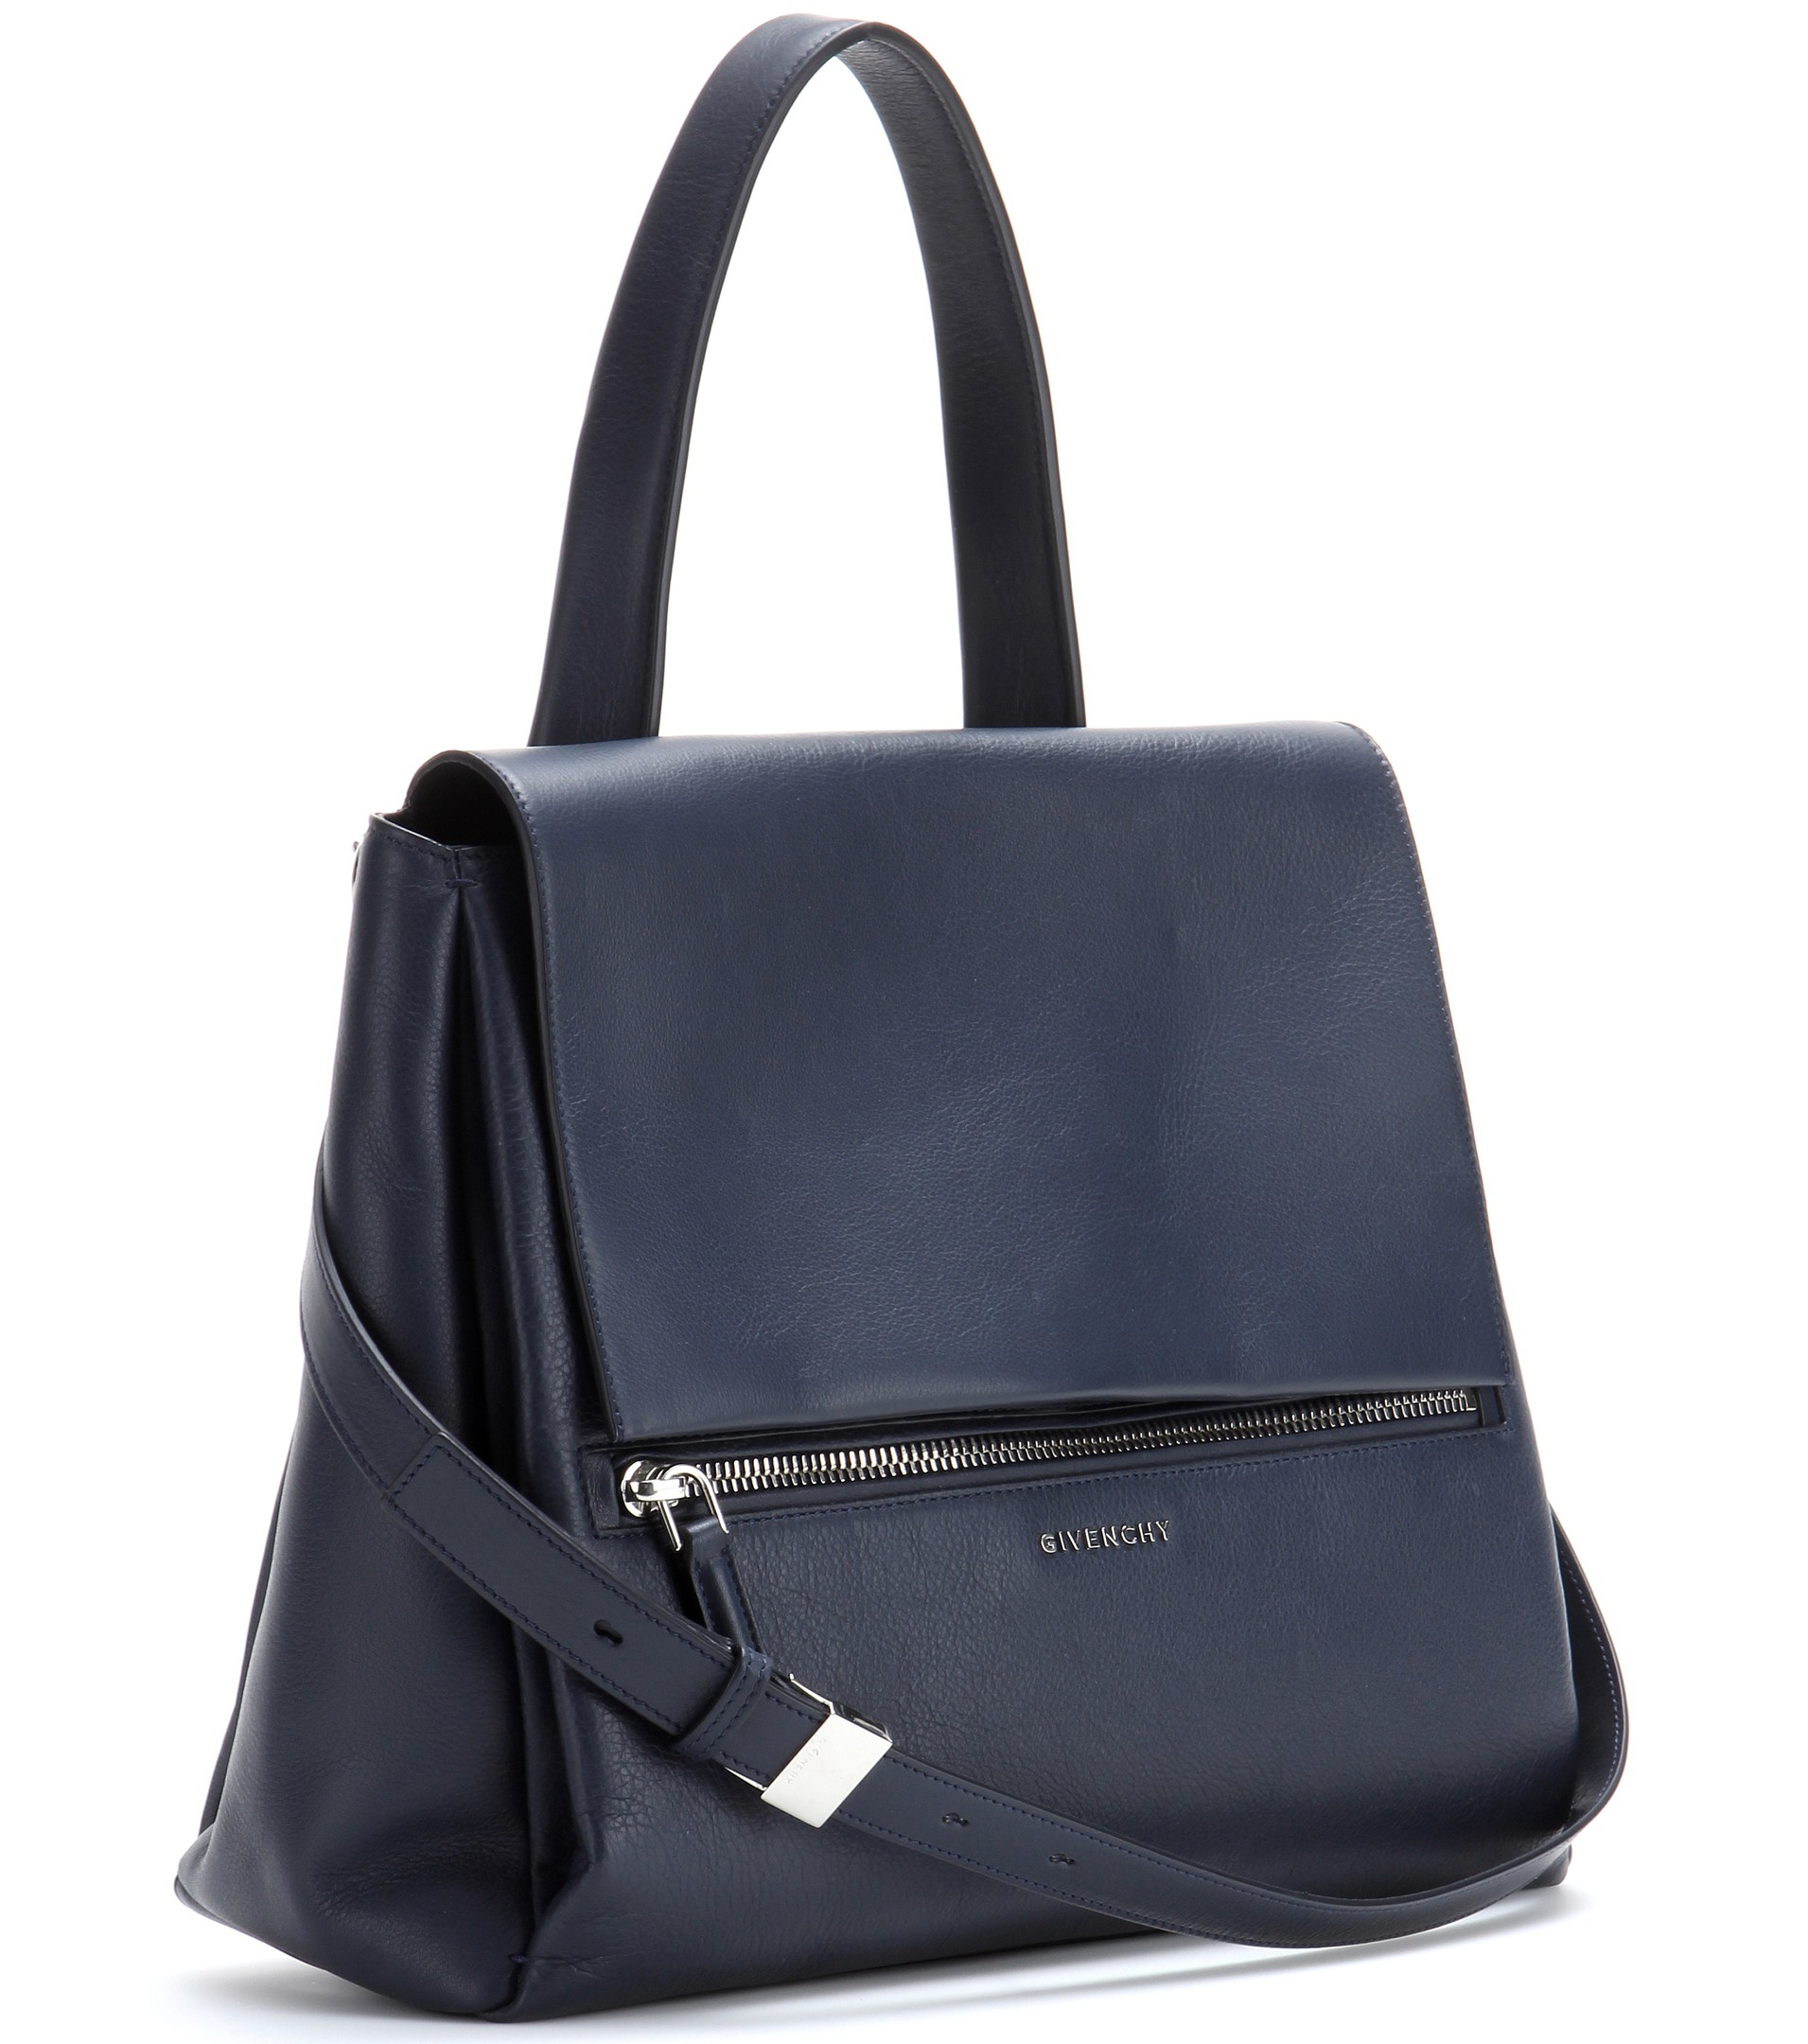 Givenchy Pandora Pure Medium Leather Bag in Night Blue (Blue) - Lyst